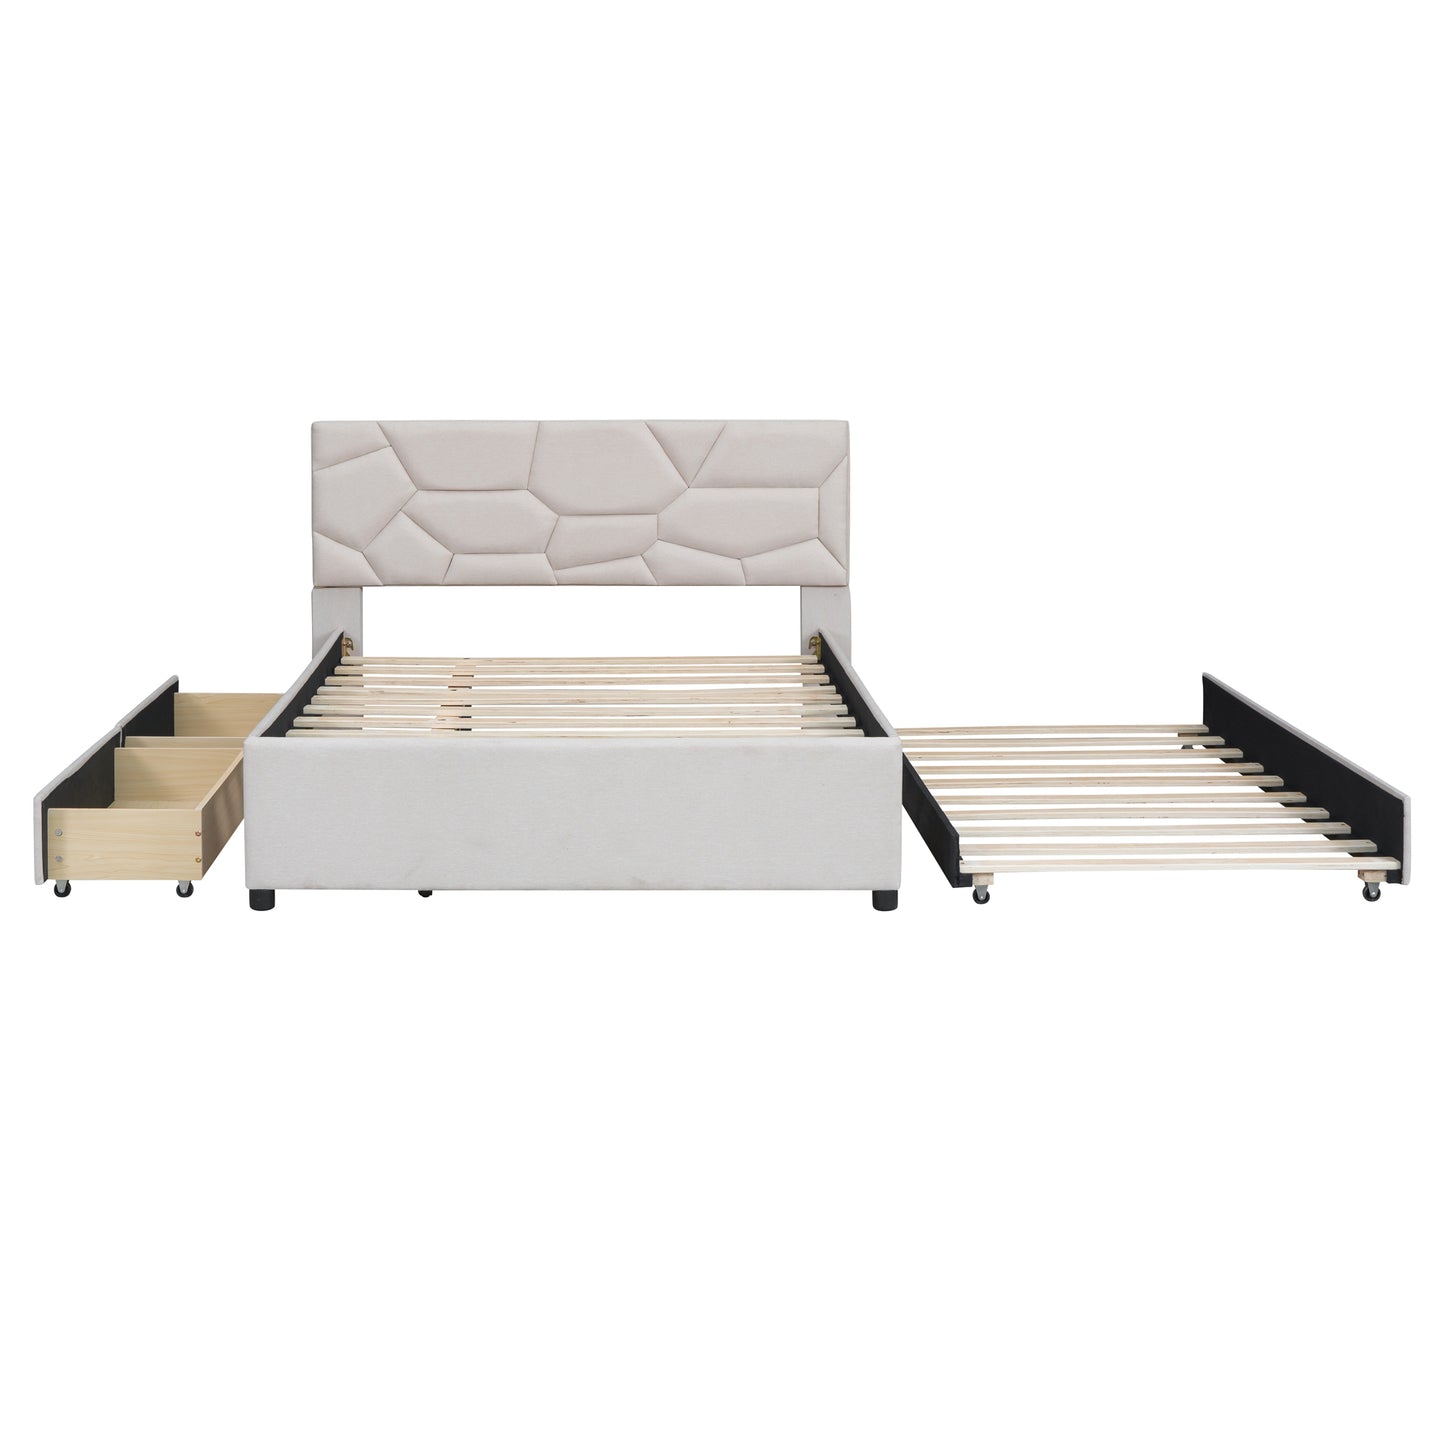 Full Size Upholstered Platform Bed with Brick Pattern Headboard, with Twin Size Trundle and 2 Drawers, Linen Fabric, Beige